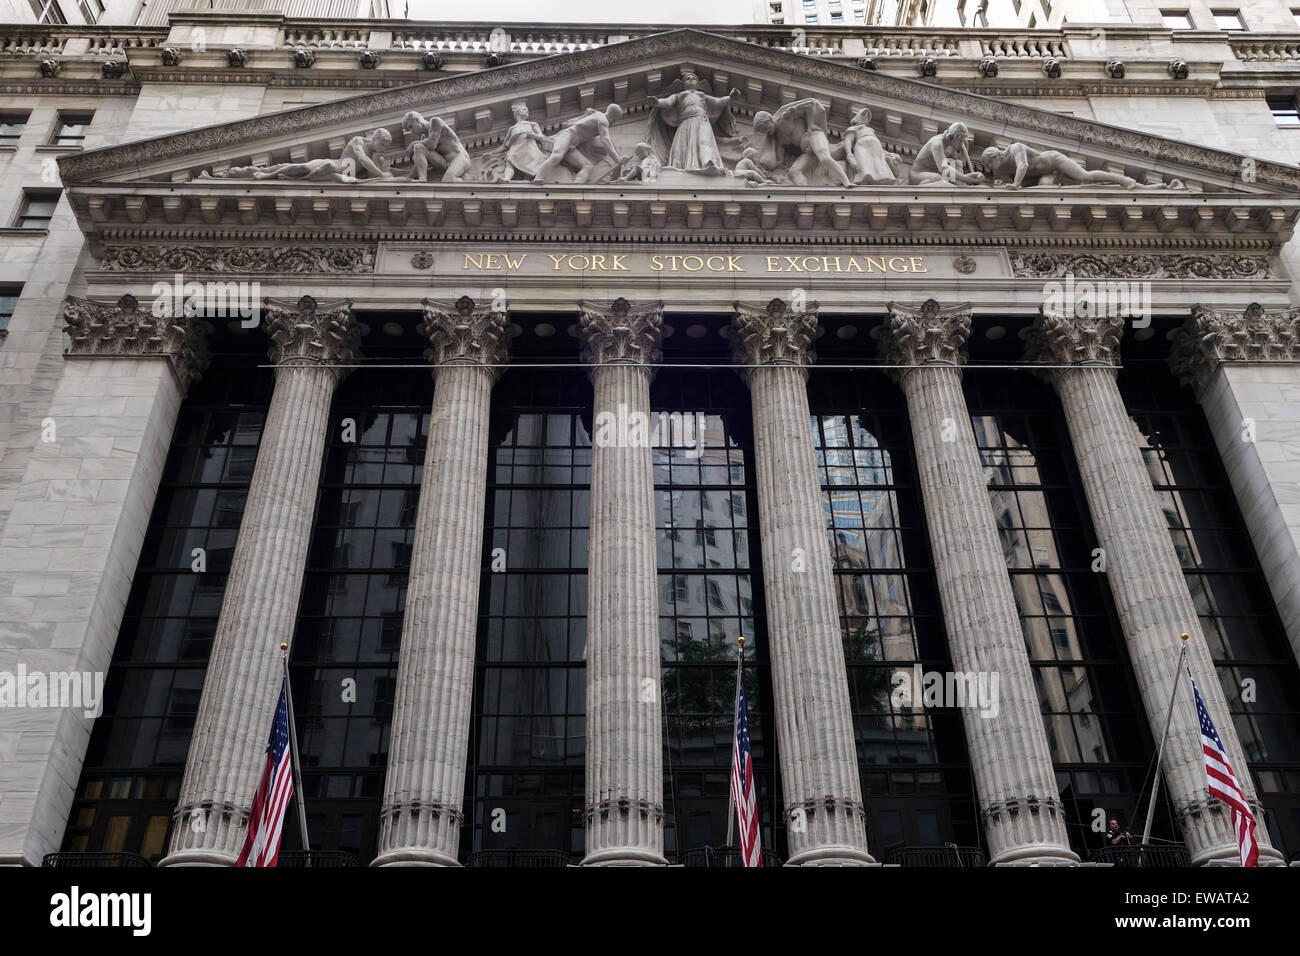 The New York Stock Exchange on Wall Street, the world's largest stock exchange, NYC, lower Manhattan, United states. USA. Stock Photo